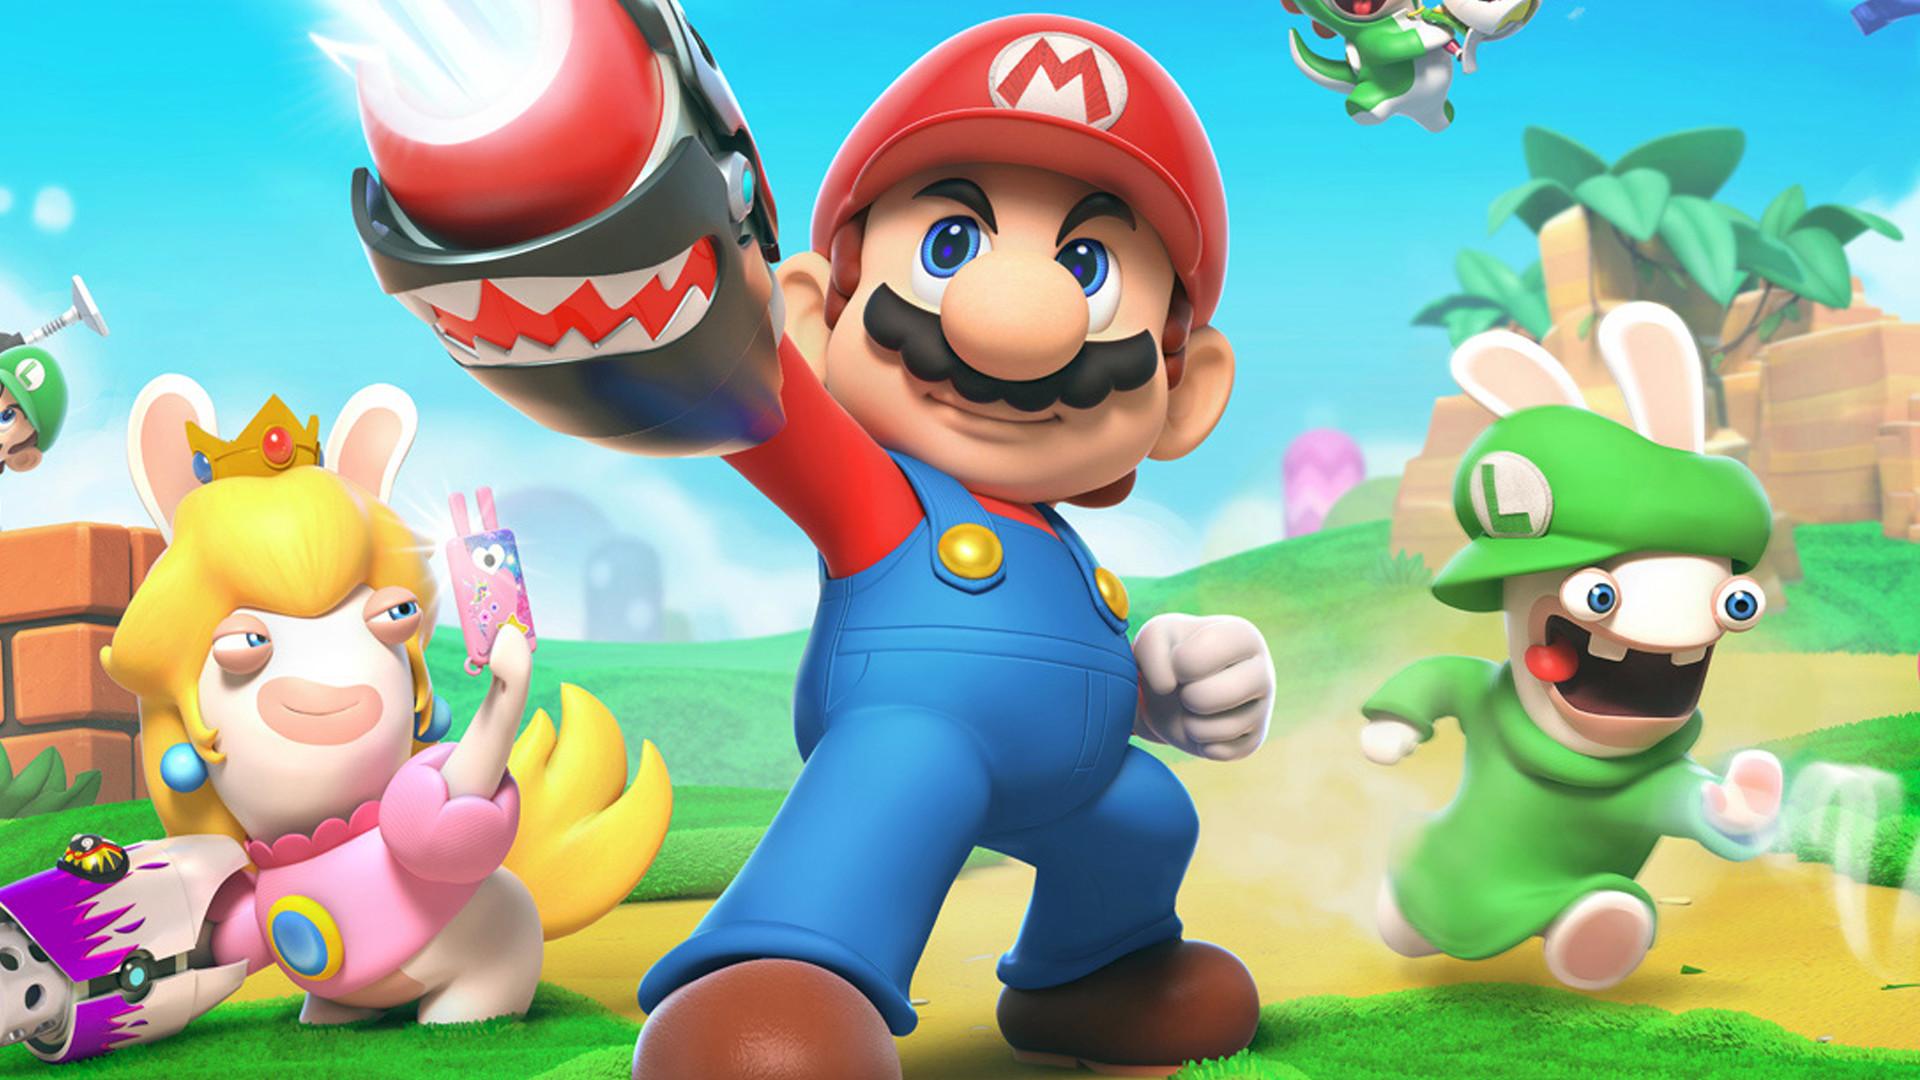 Mario + Rabbids: Kingdom Battle (Switch) Review: Engrossing Tactics